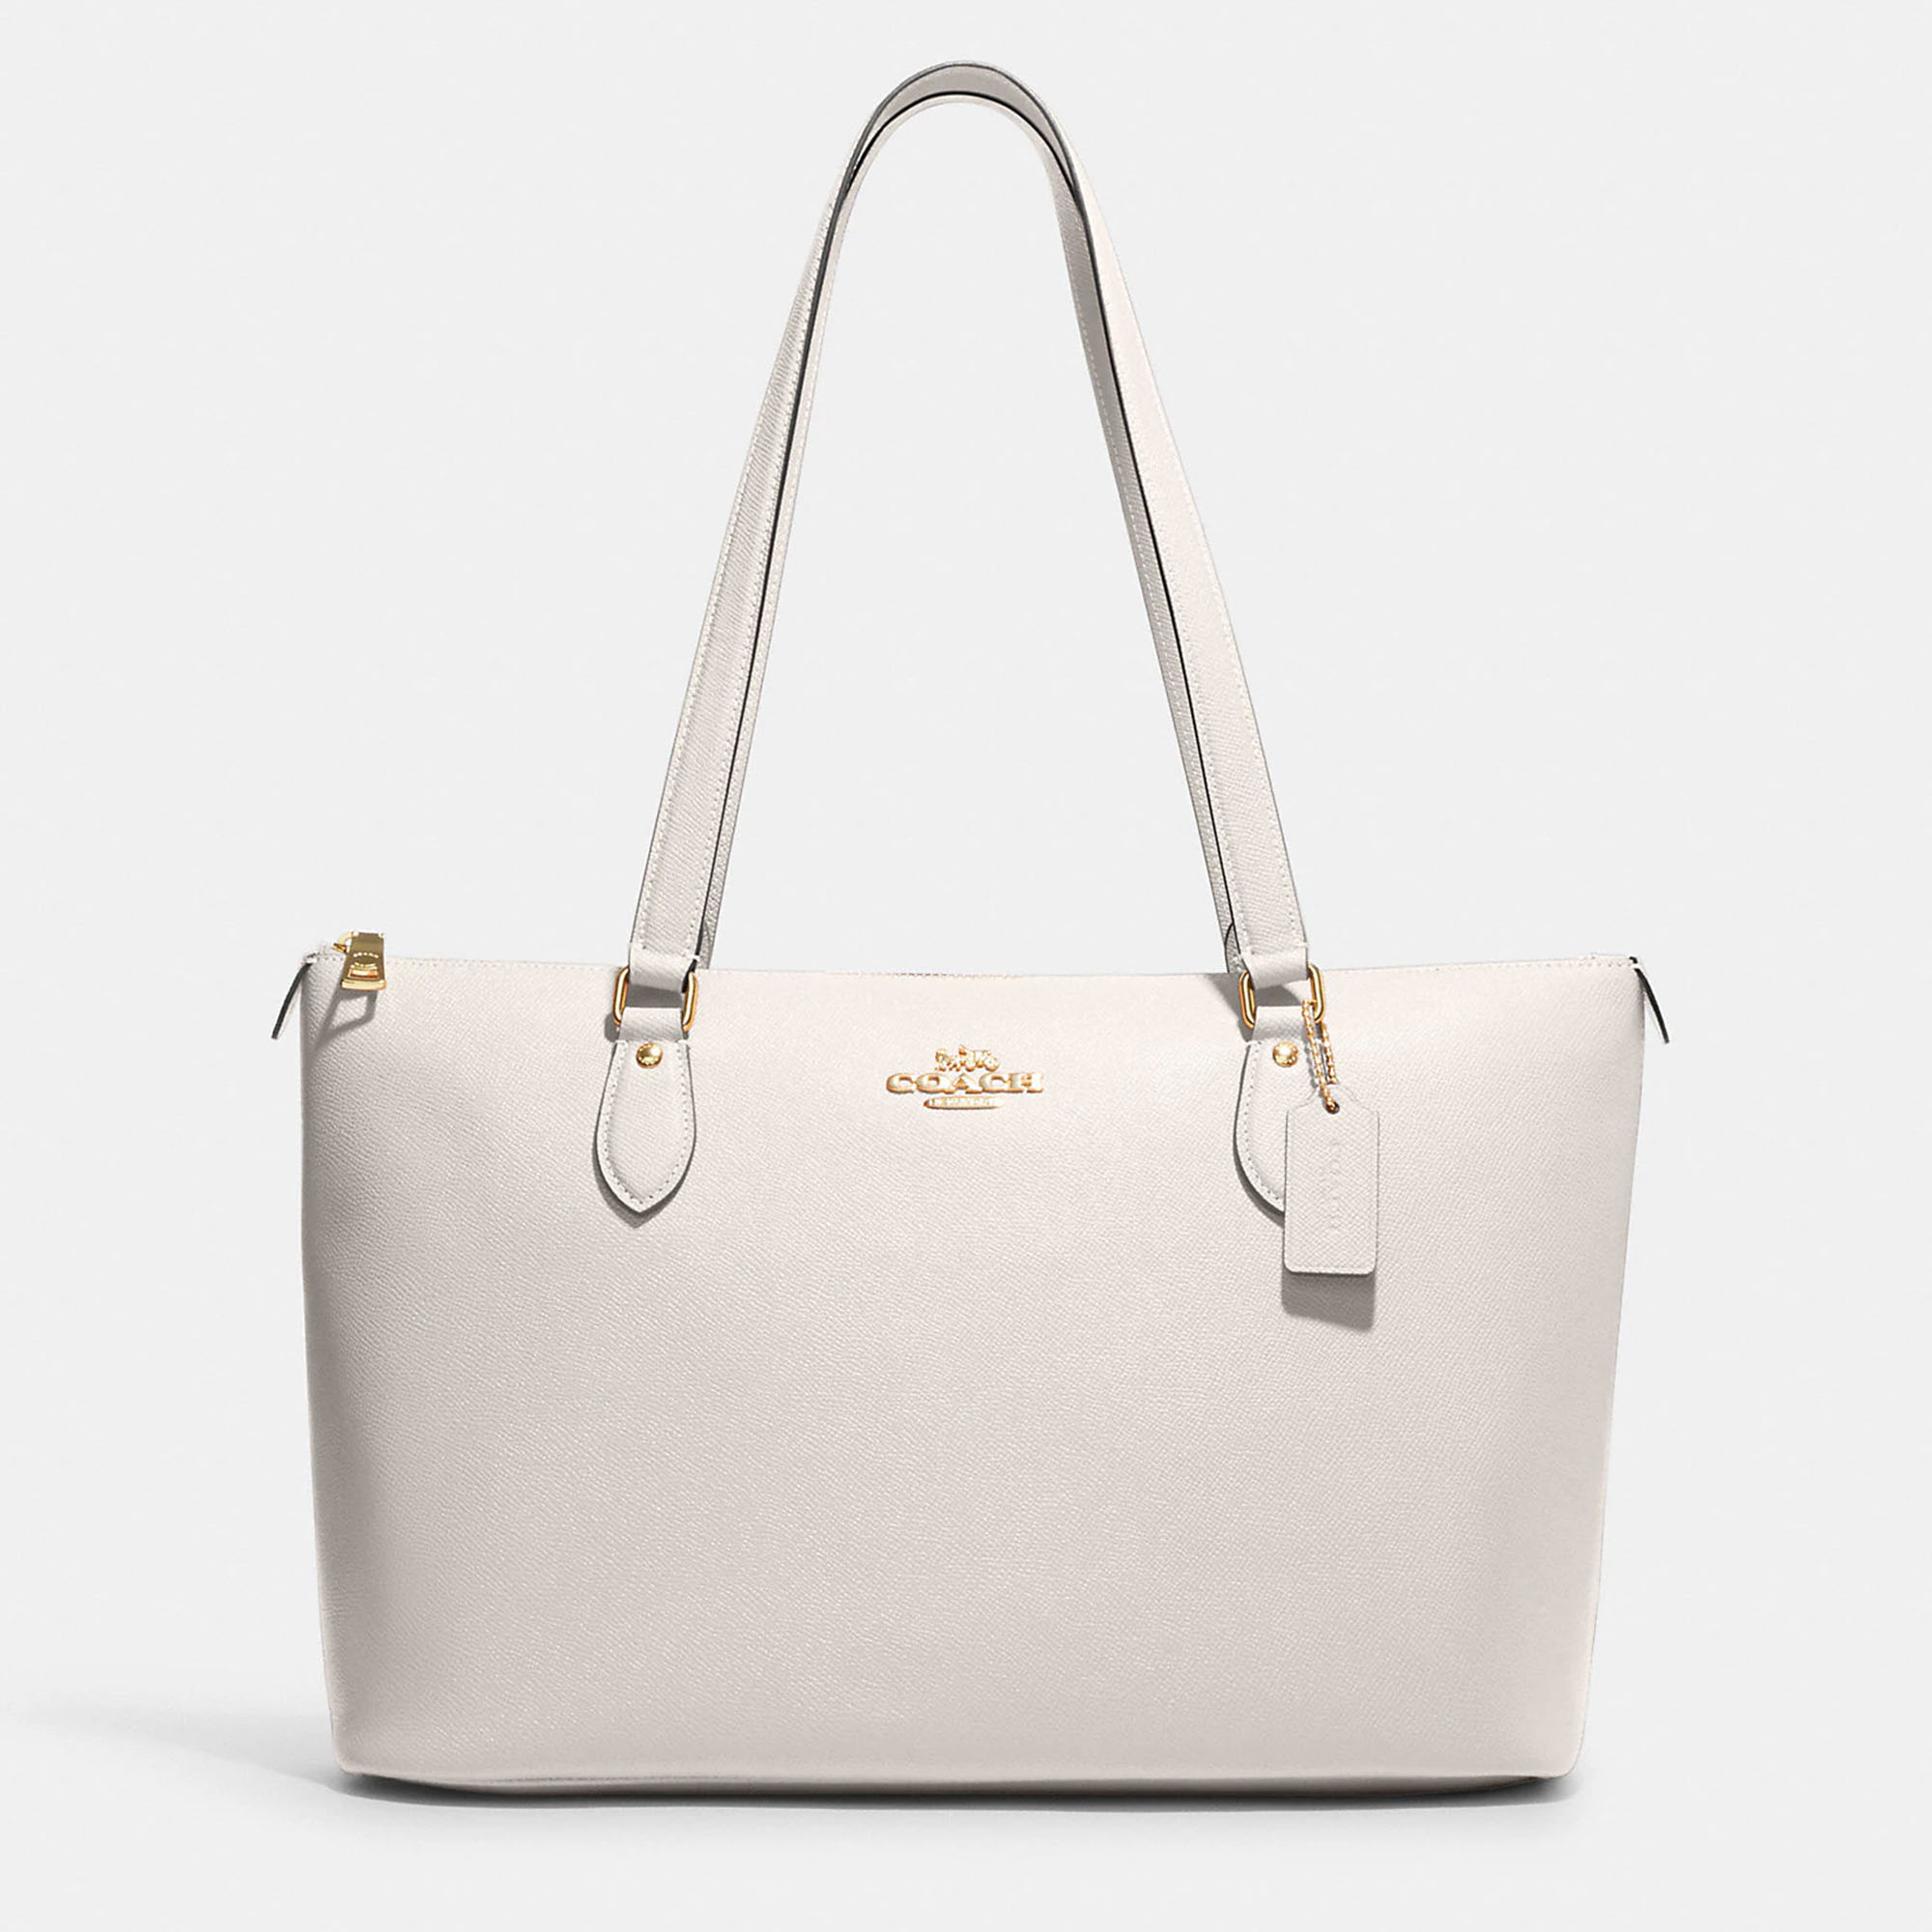 Coach White Leather Gallery Tote